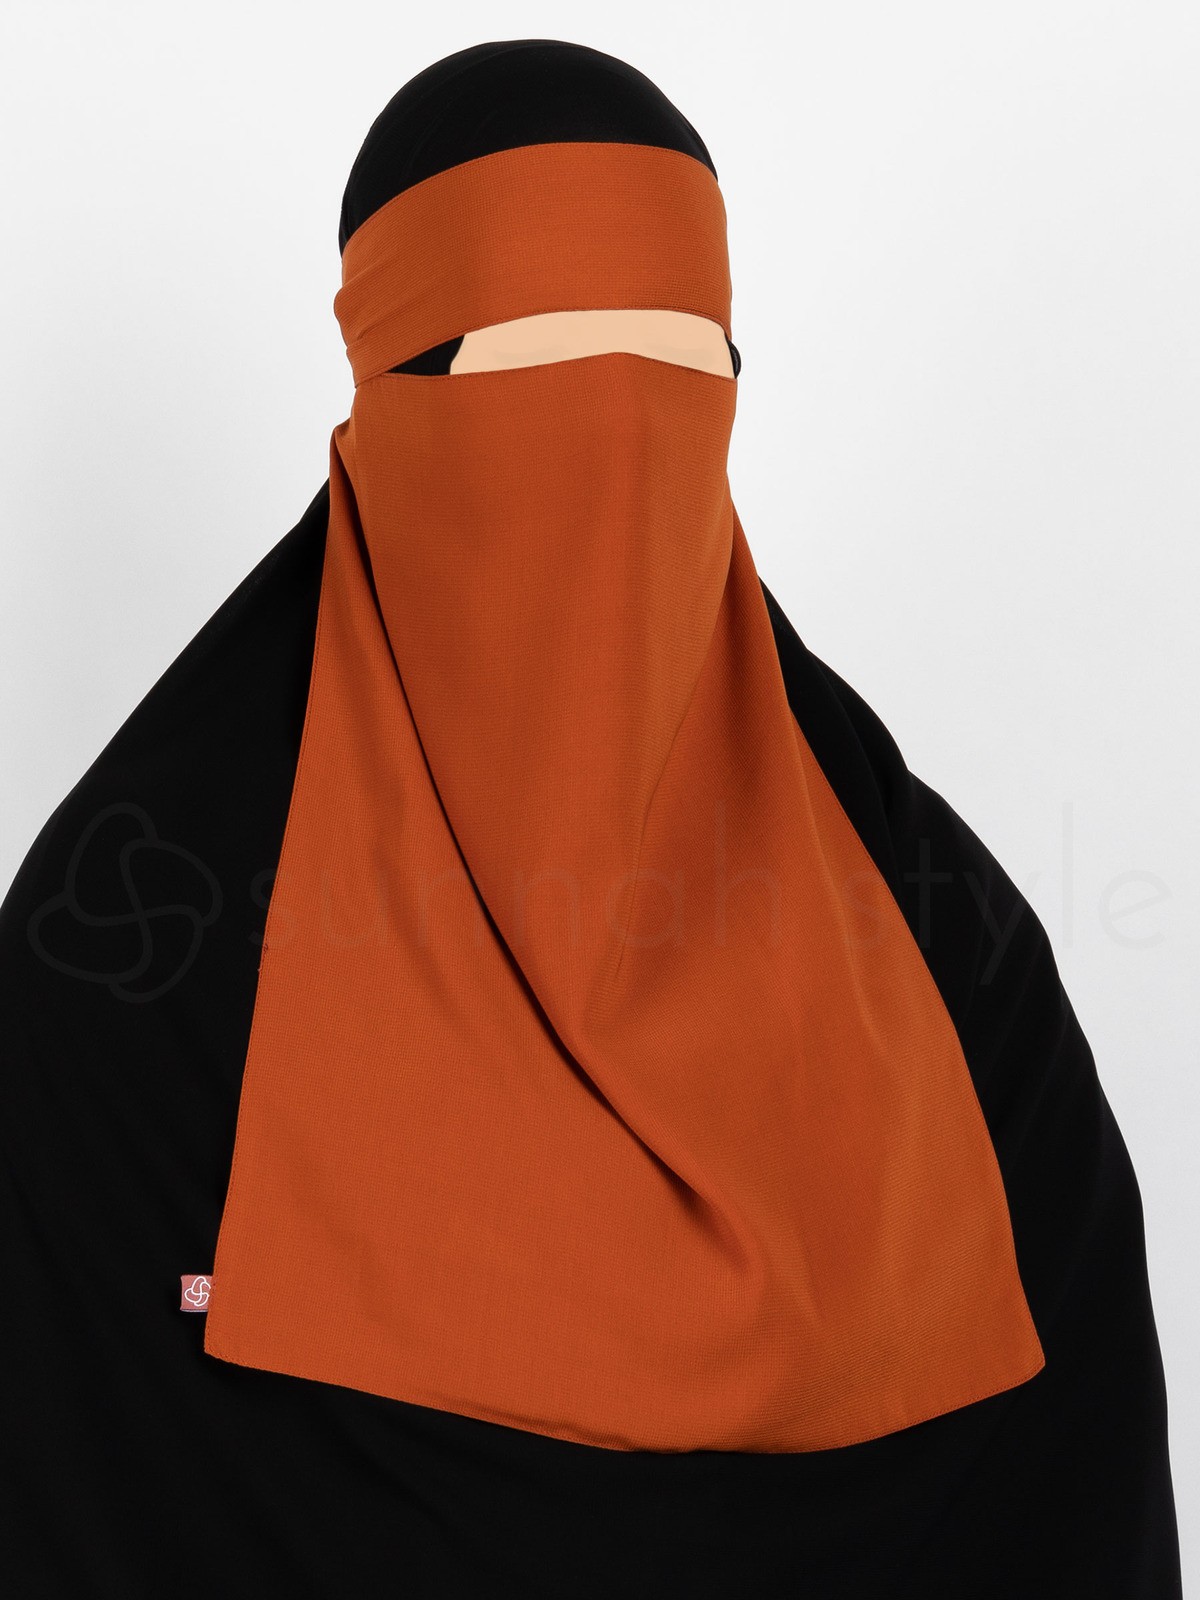 Sunnah Style - Pull-Down One Layer Niqab (Autumn)